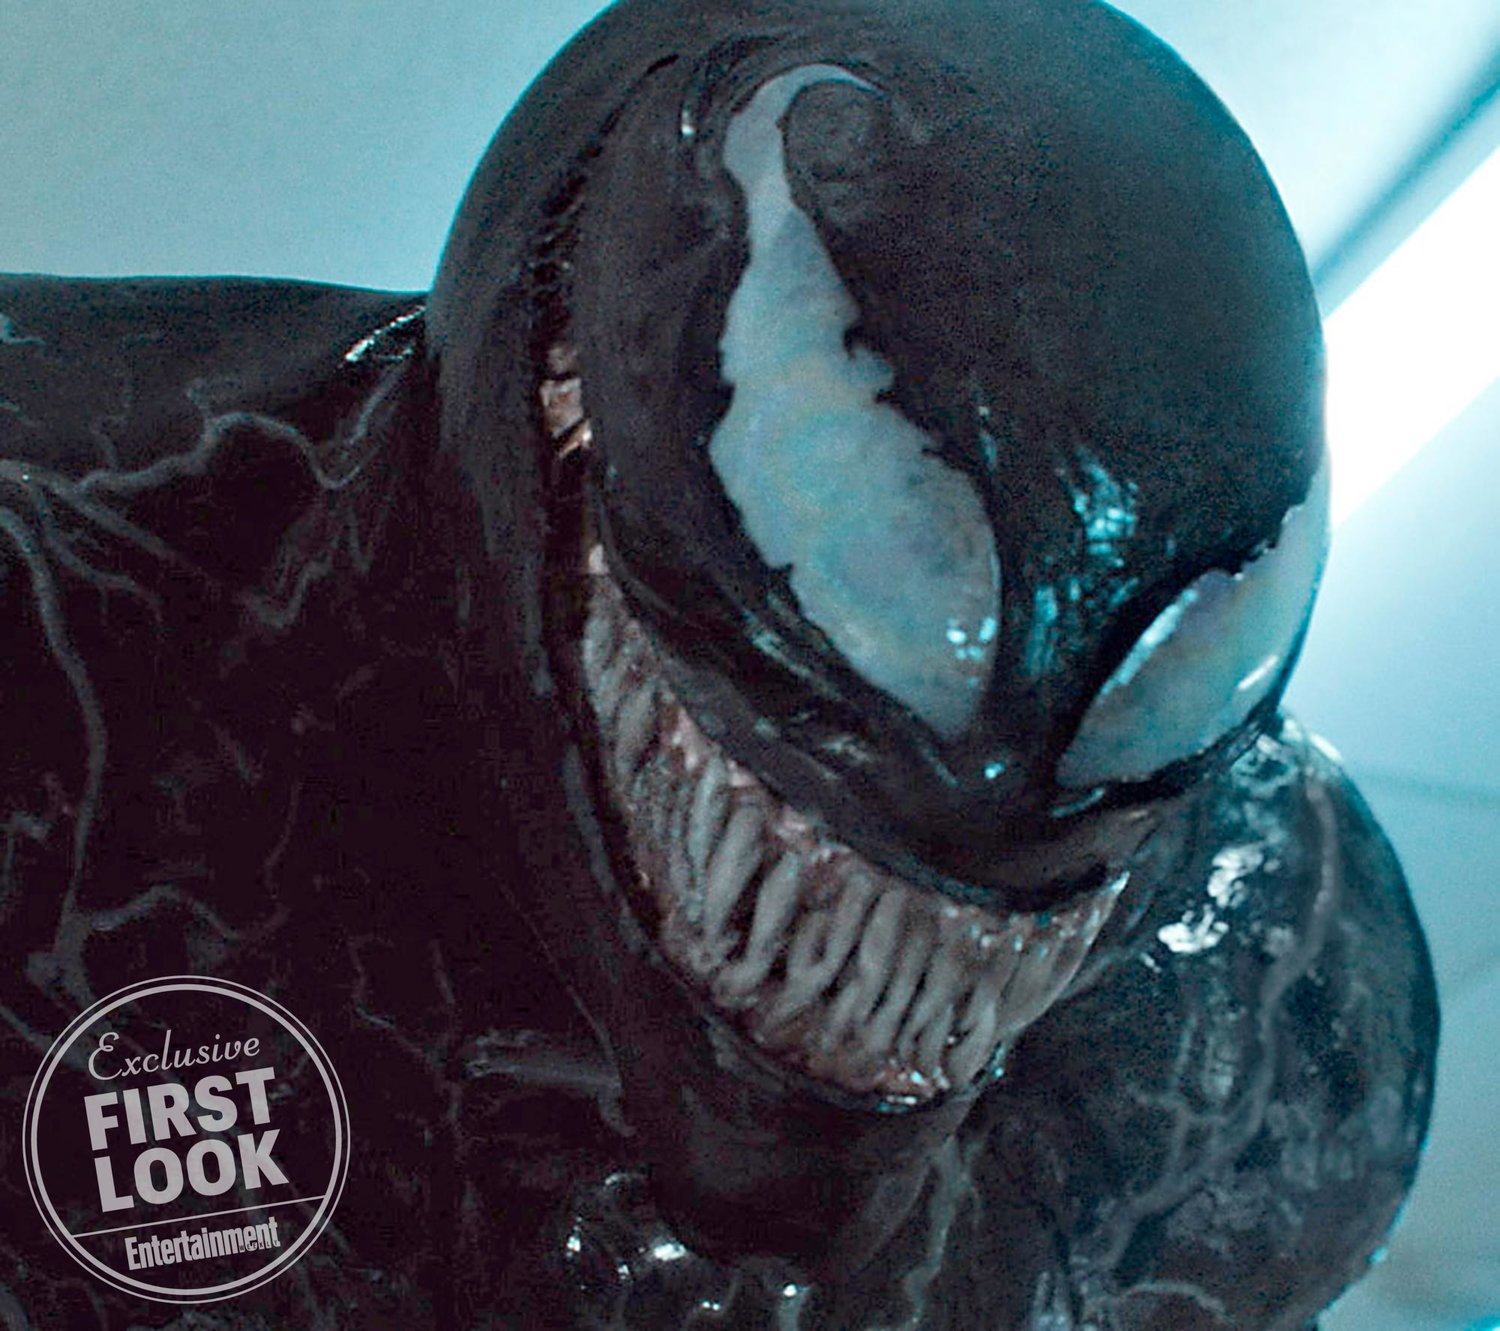 venom-is-shows-off-his-sinister-grin-in-new-photos-from-the-upcoming-film1